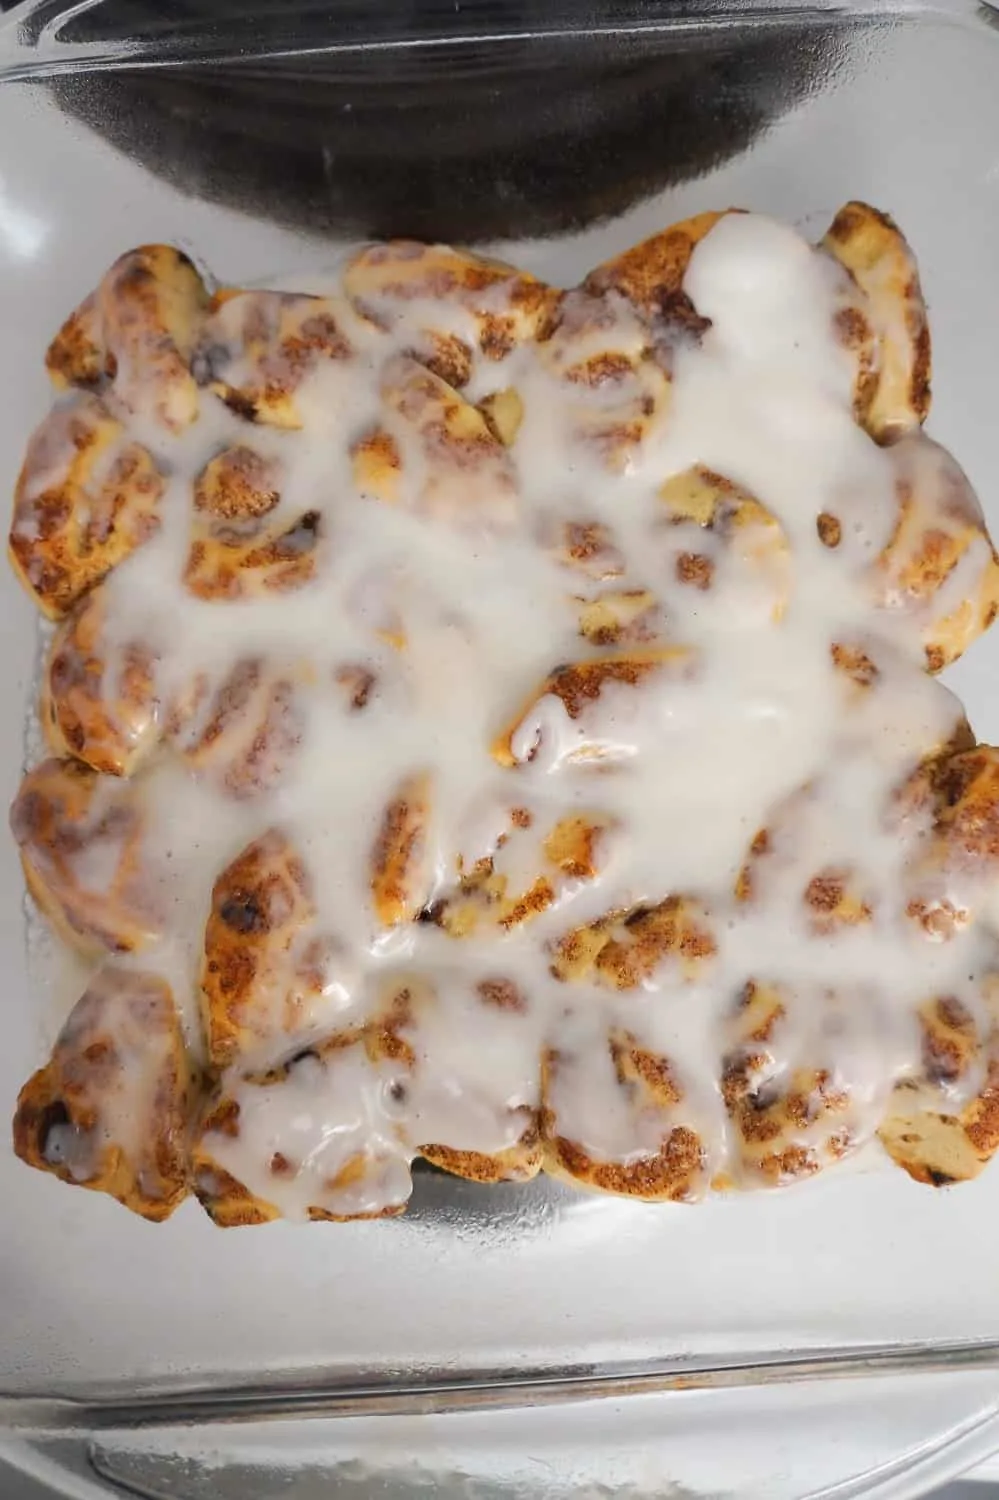 baked cinnamon bun pieces with icing